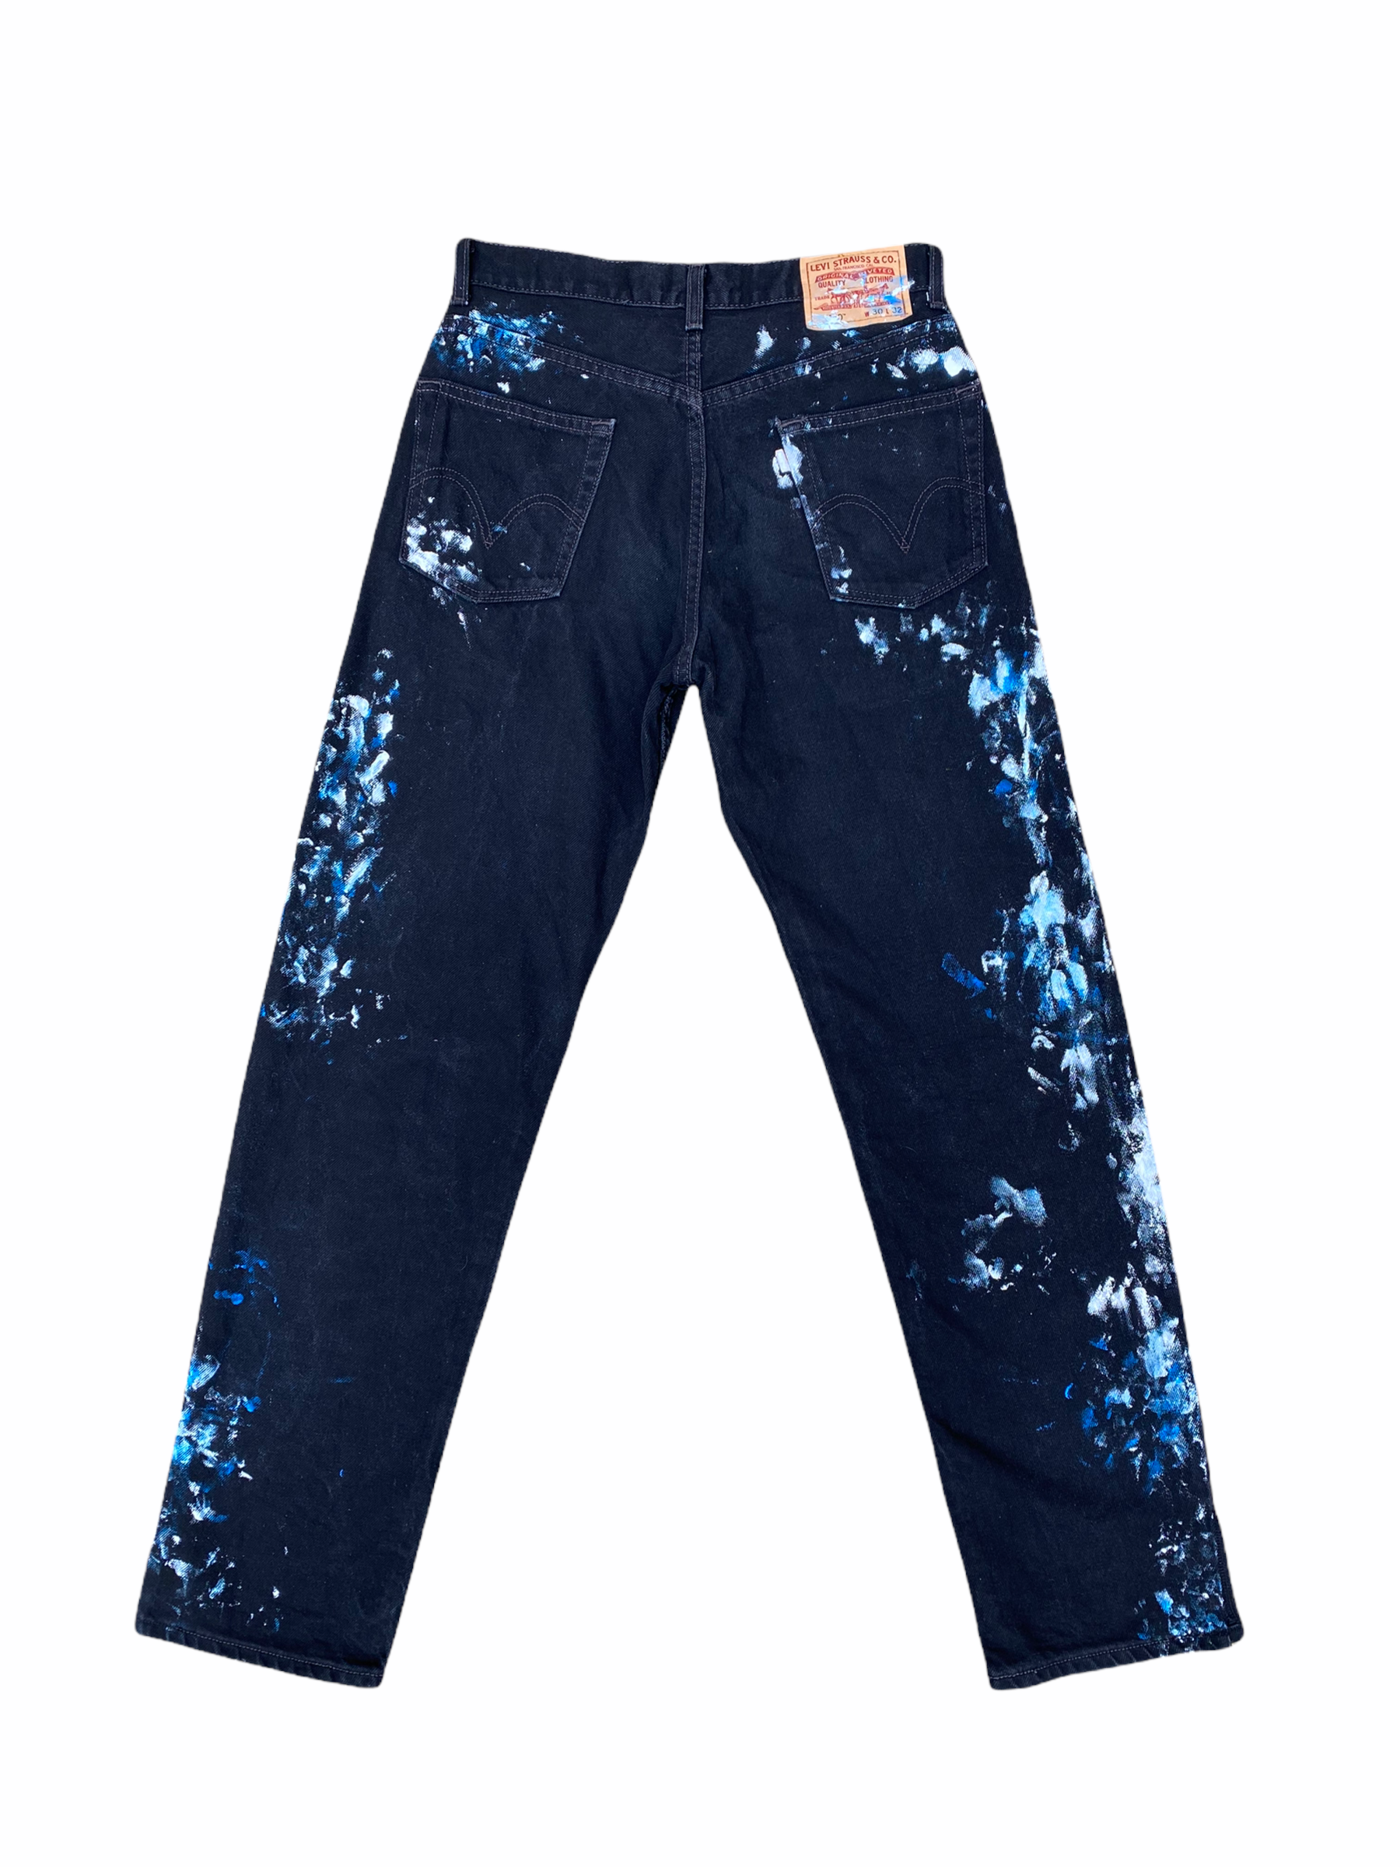 THE PAINTED JEANS V1